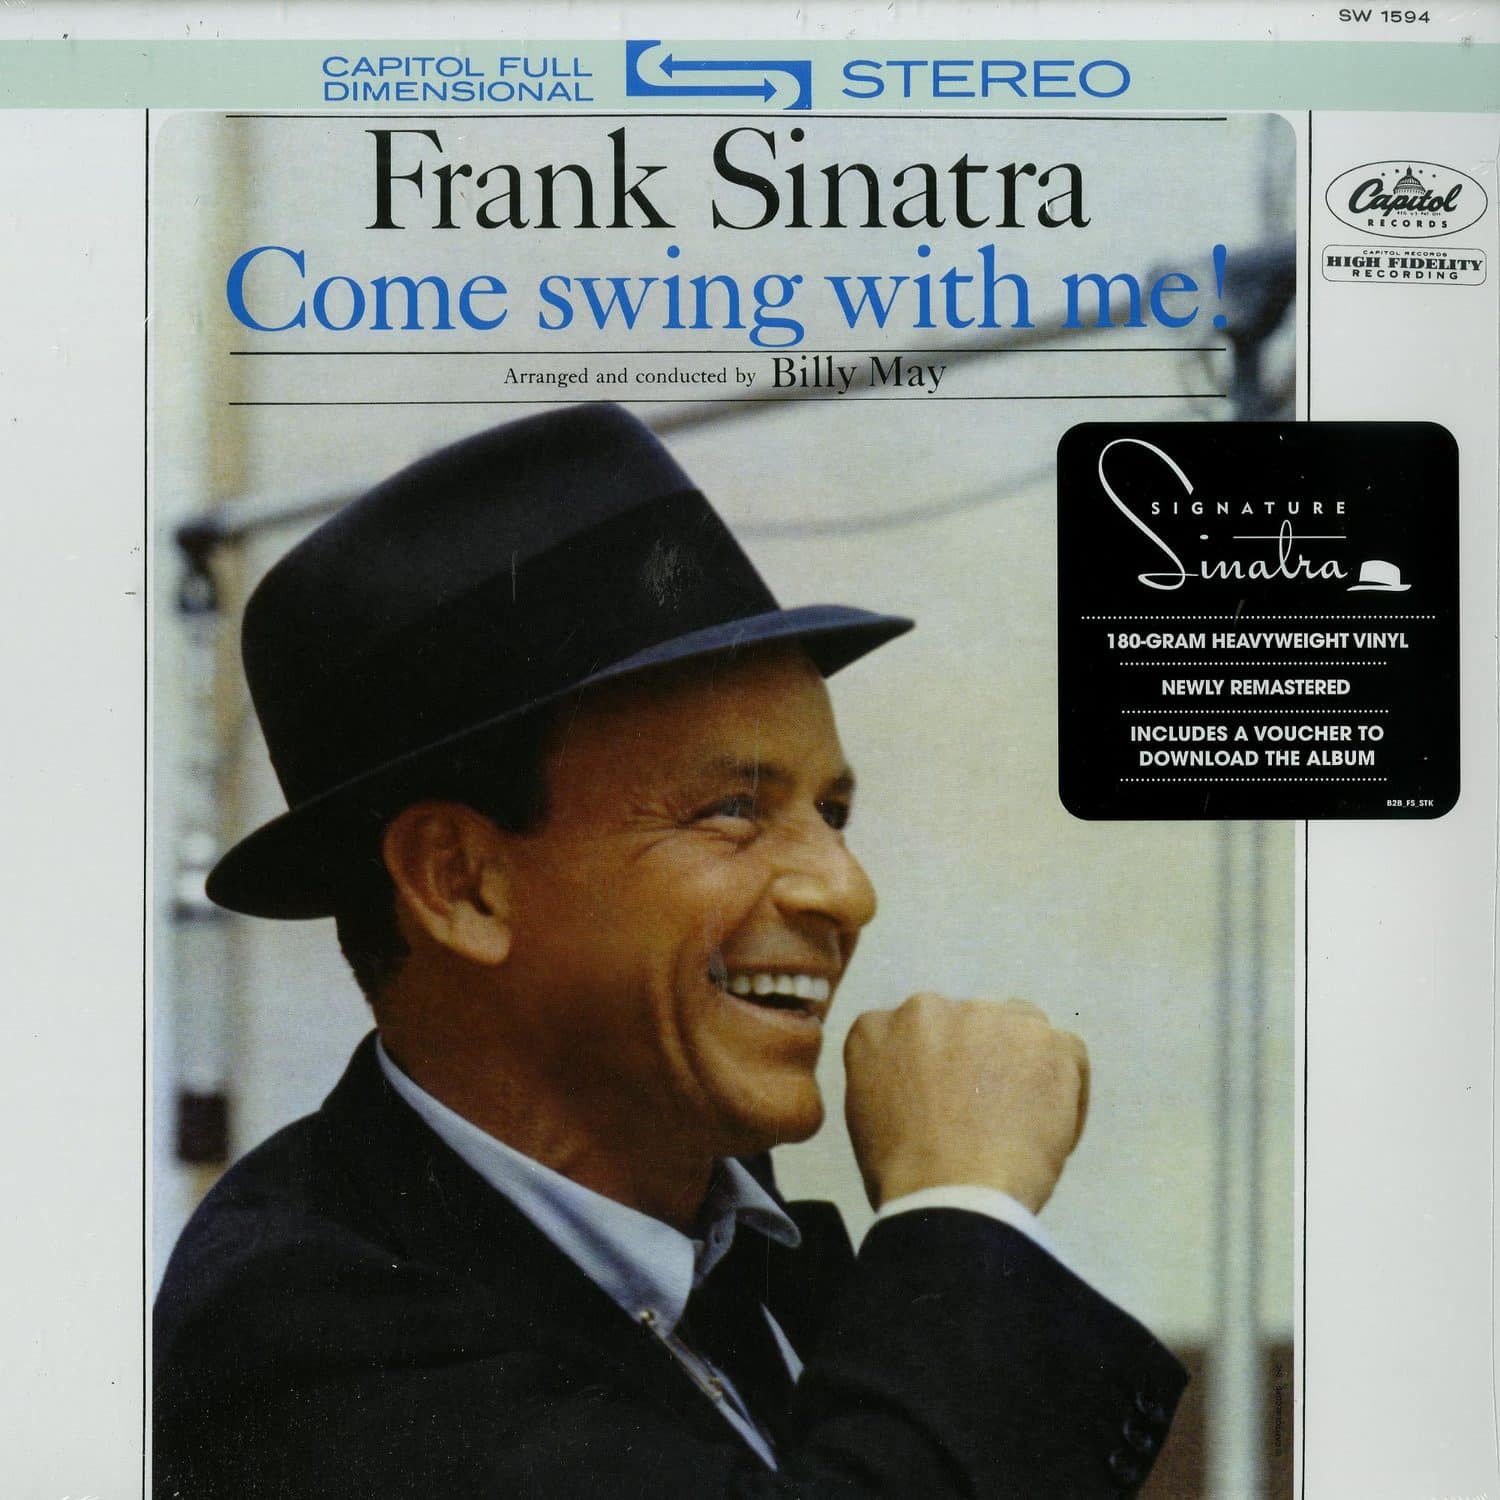 Frank Sinatra - COME SWING WITH ME! 